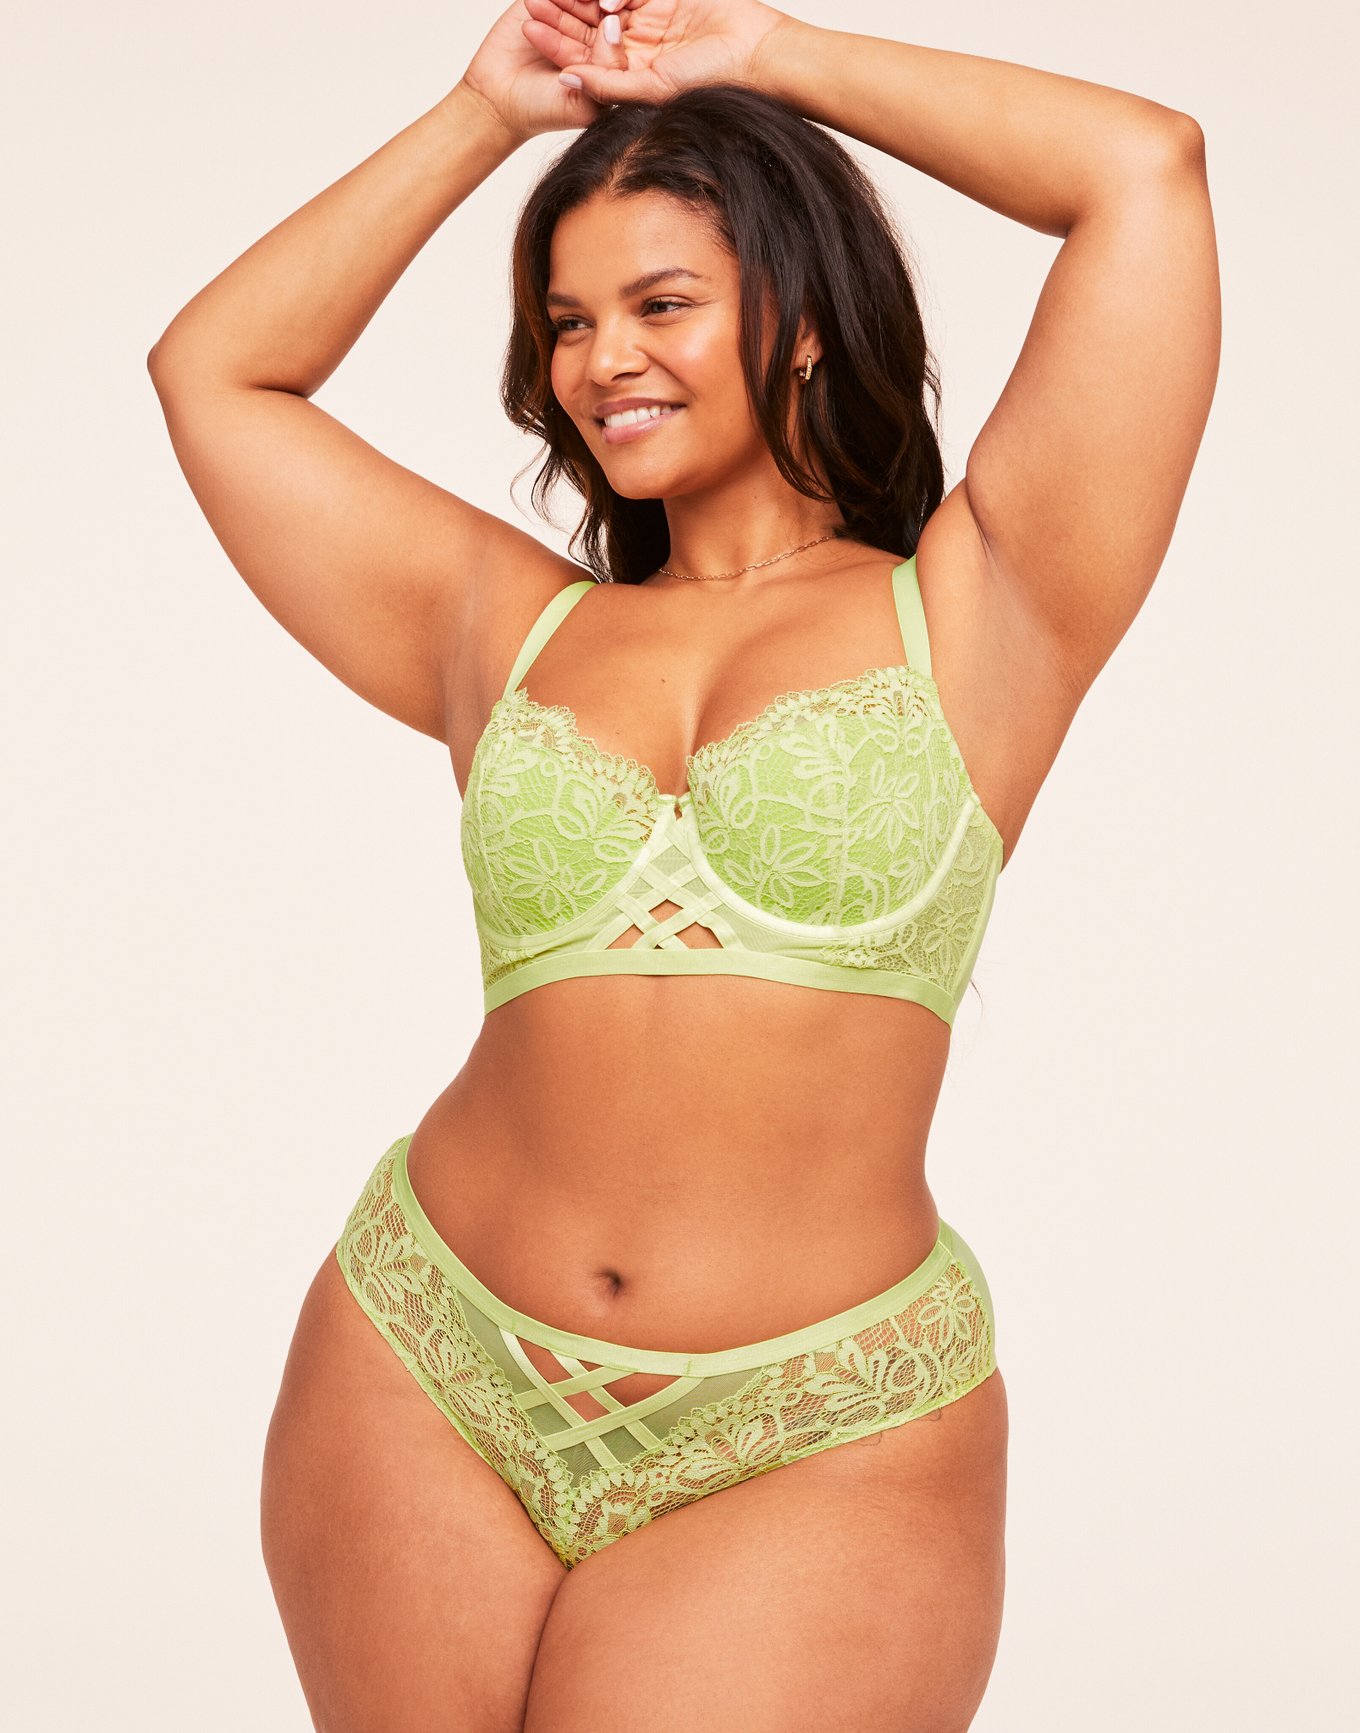 Flattering Plus Size Cotton Lace Bra with Balconette Style - 2 or 3 Pack